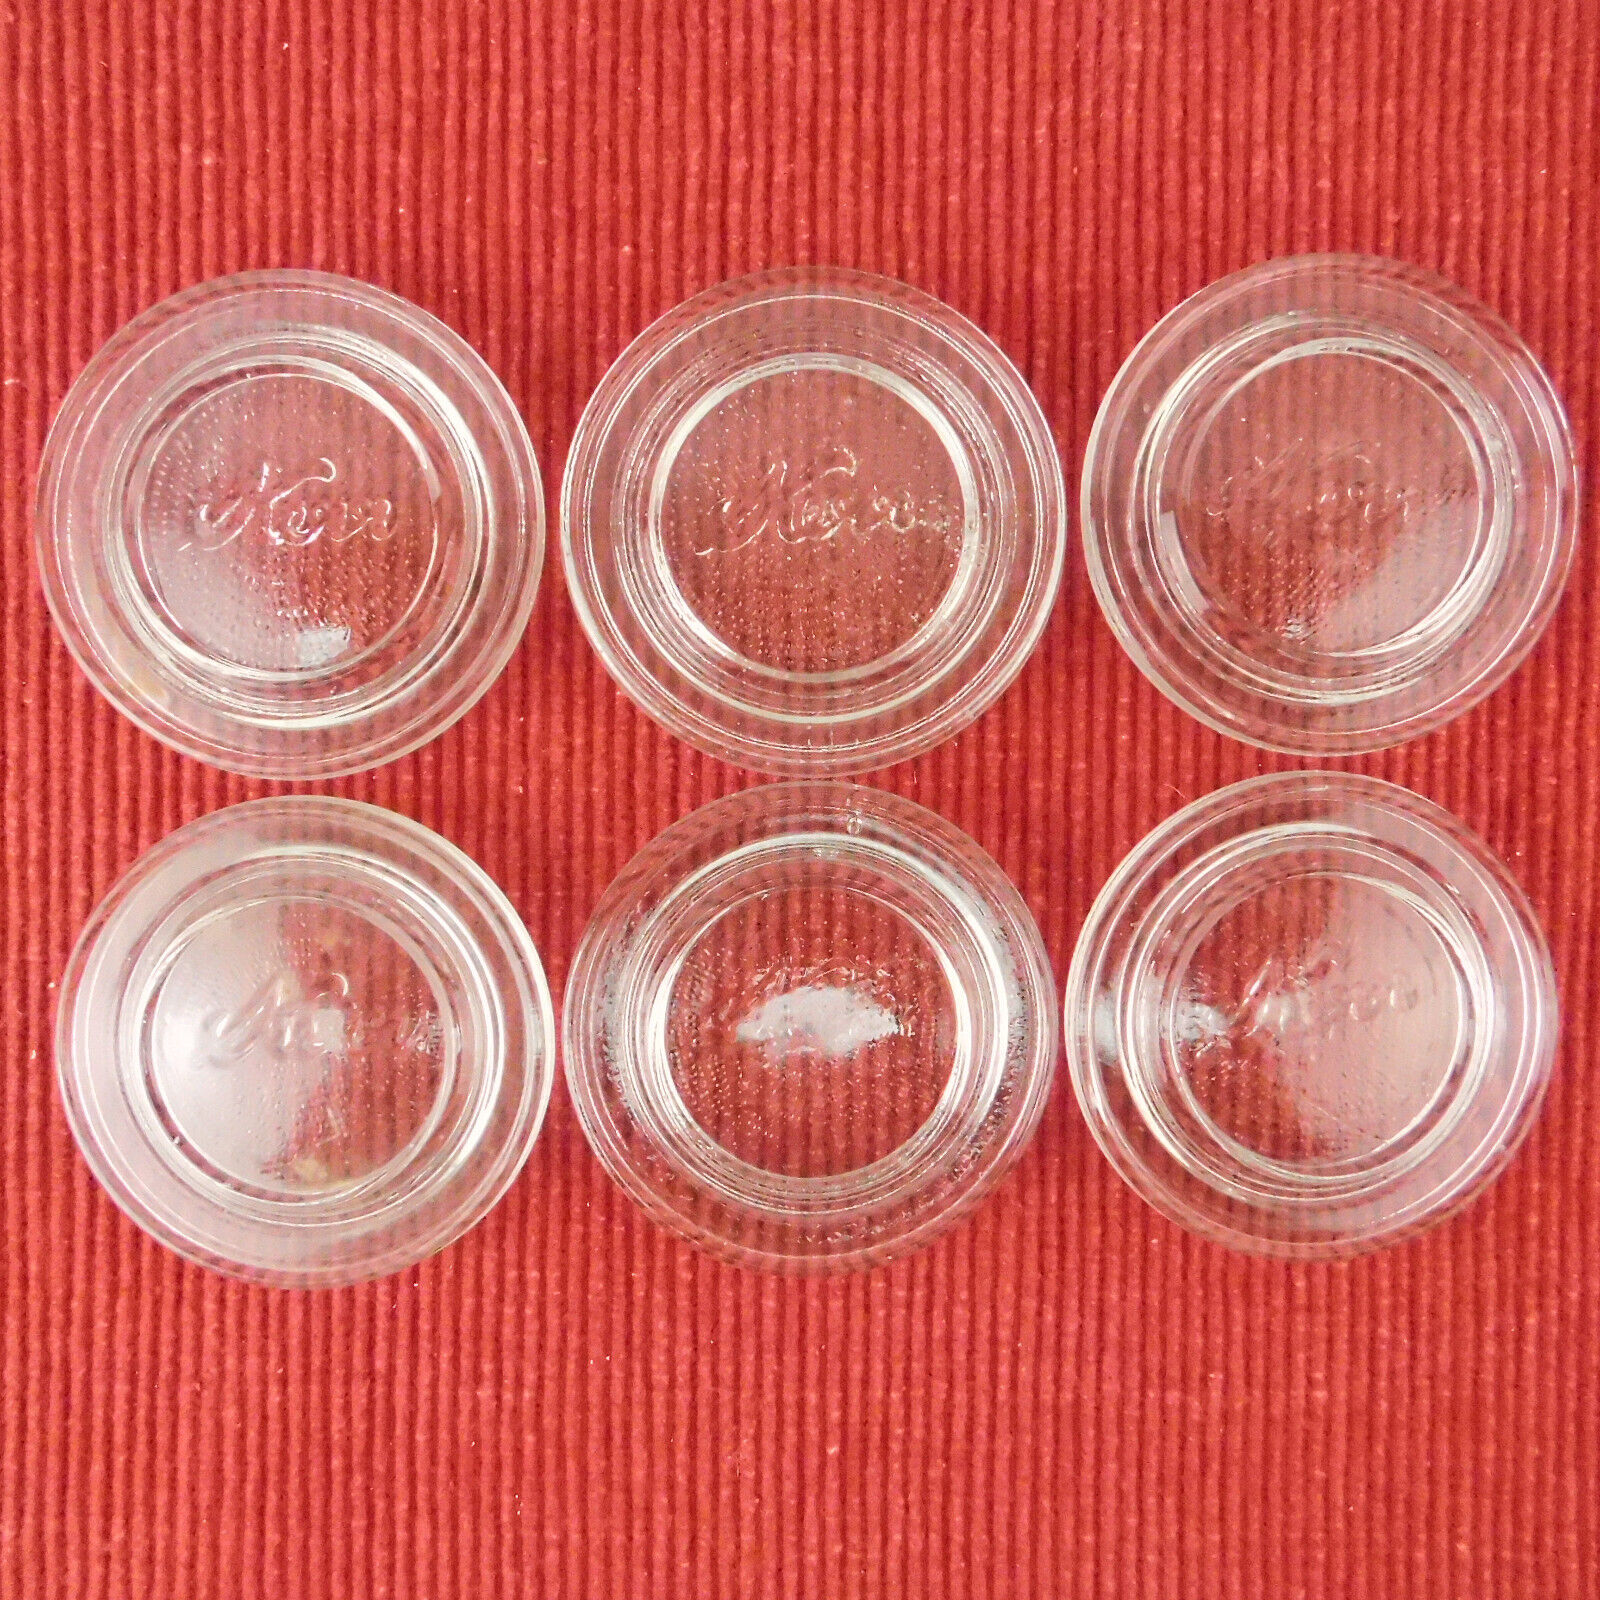 Lot of 6 Vintage Kerr Atlas Clear Glass Canning Jar Lid Inserts 2.5" No Chips Atlas and Kerr